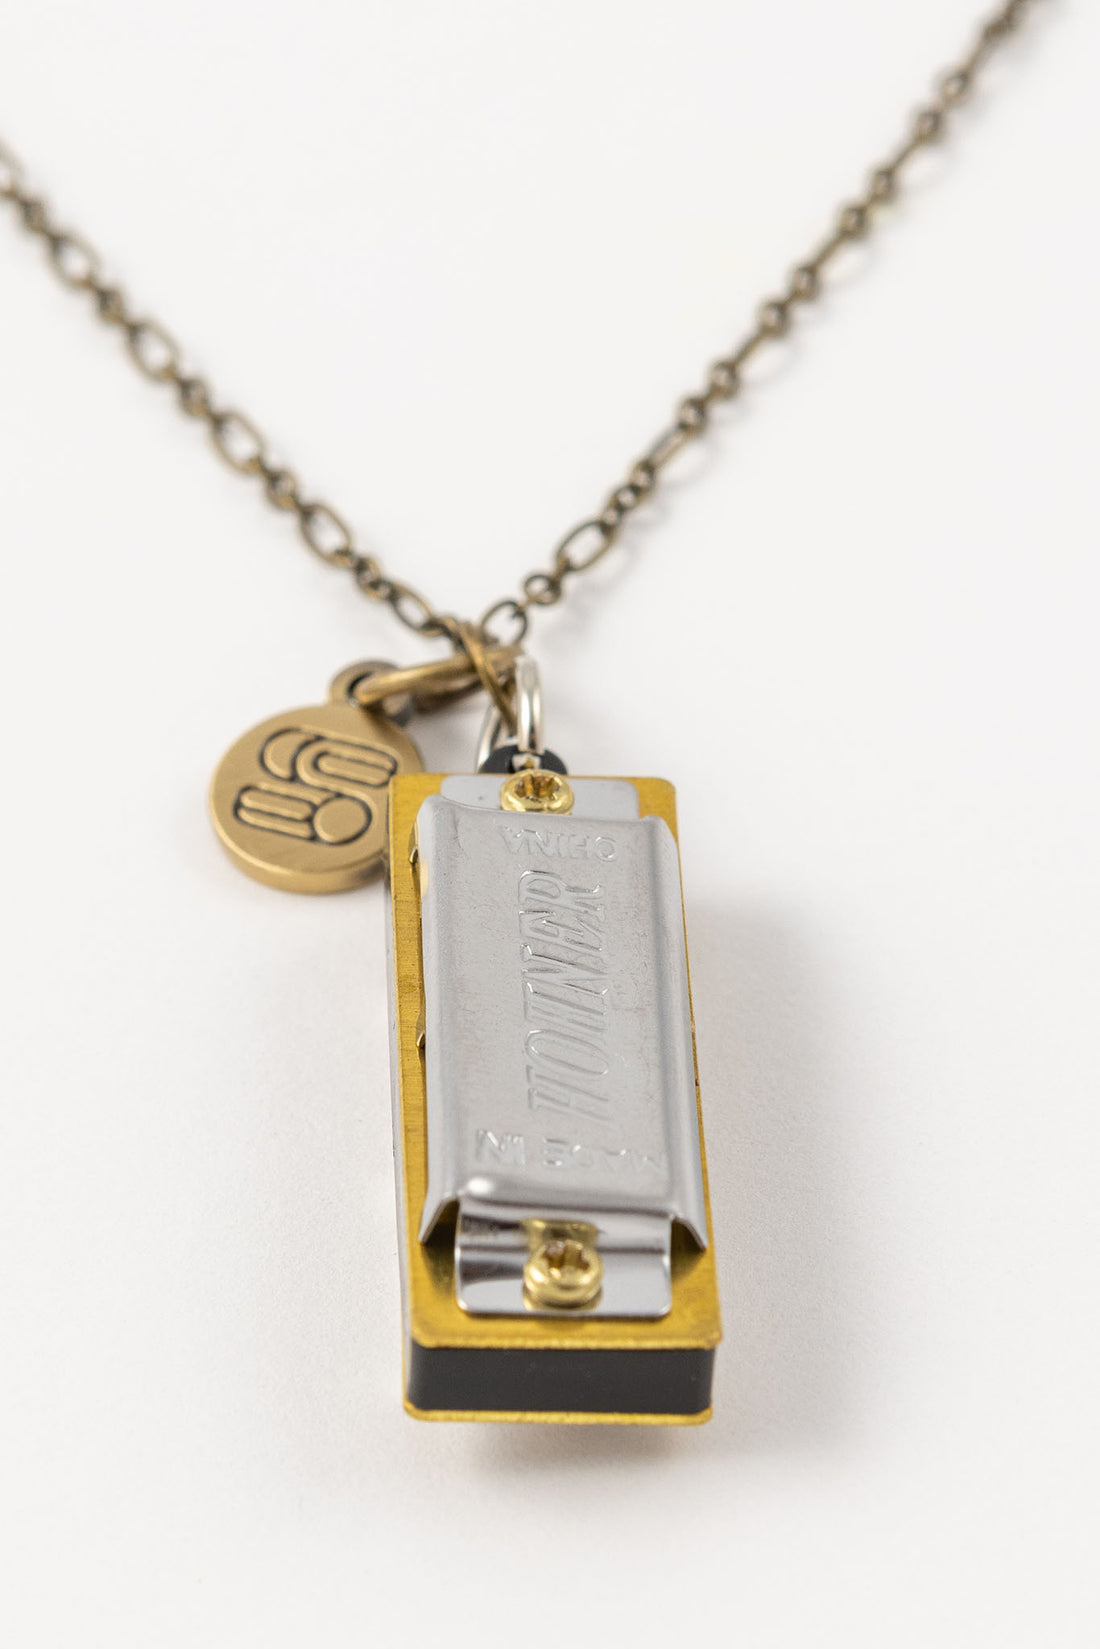 Genuine Hohner harmonica necklace with brass charm with Sound as Ever logo